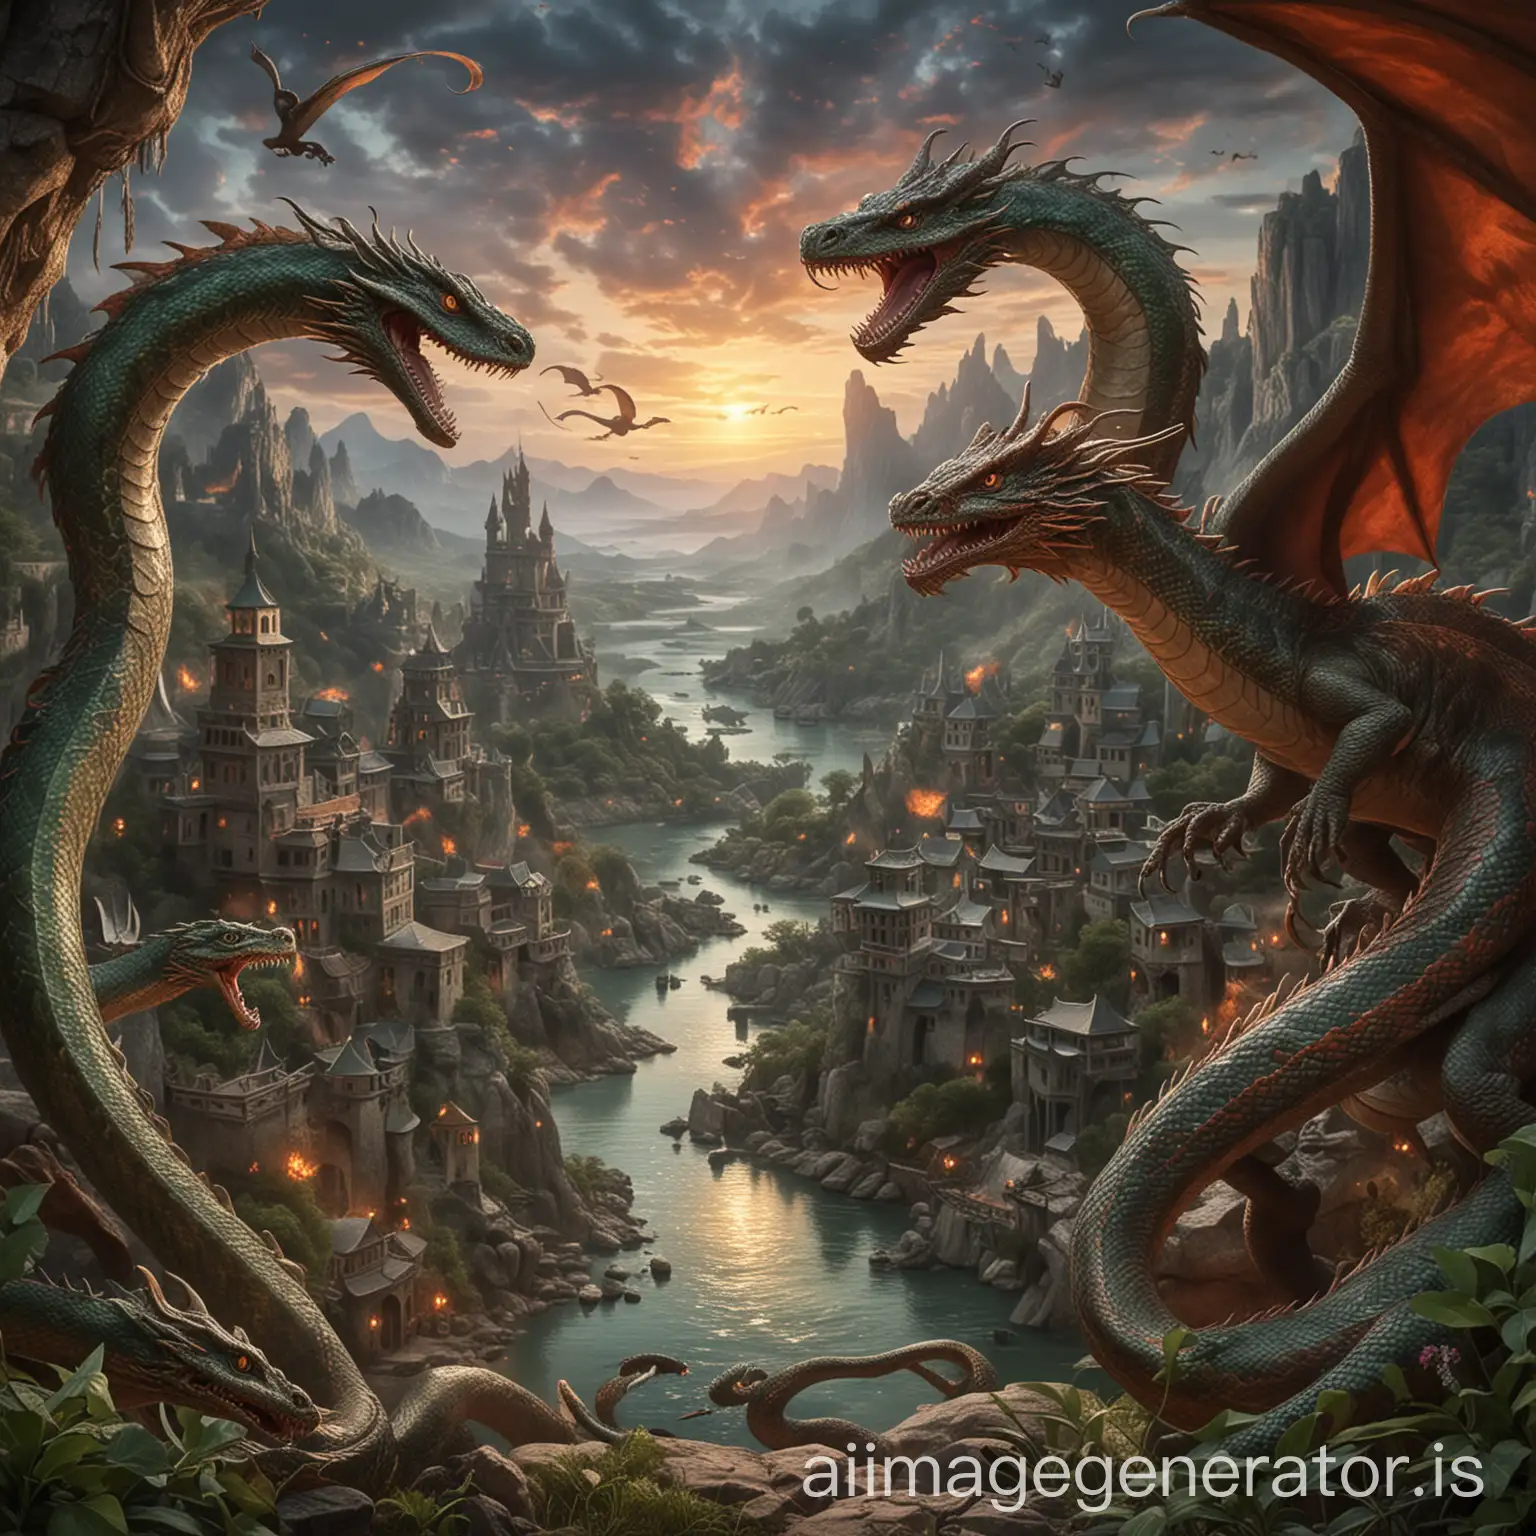 Epic-Battle-ThreeHeaded-Snake-and-Dragon-in-a-Magical-Duel